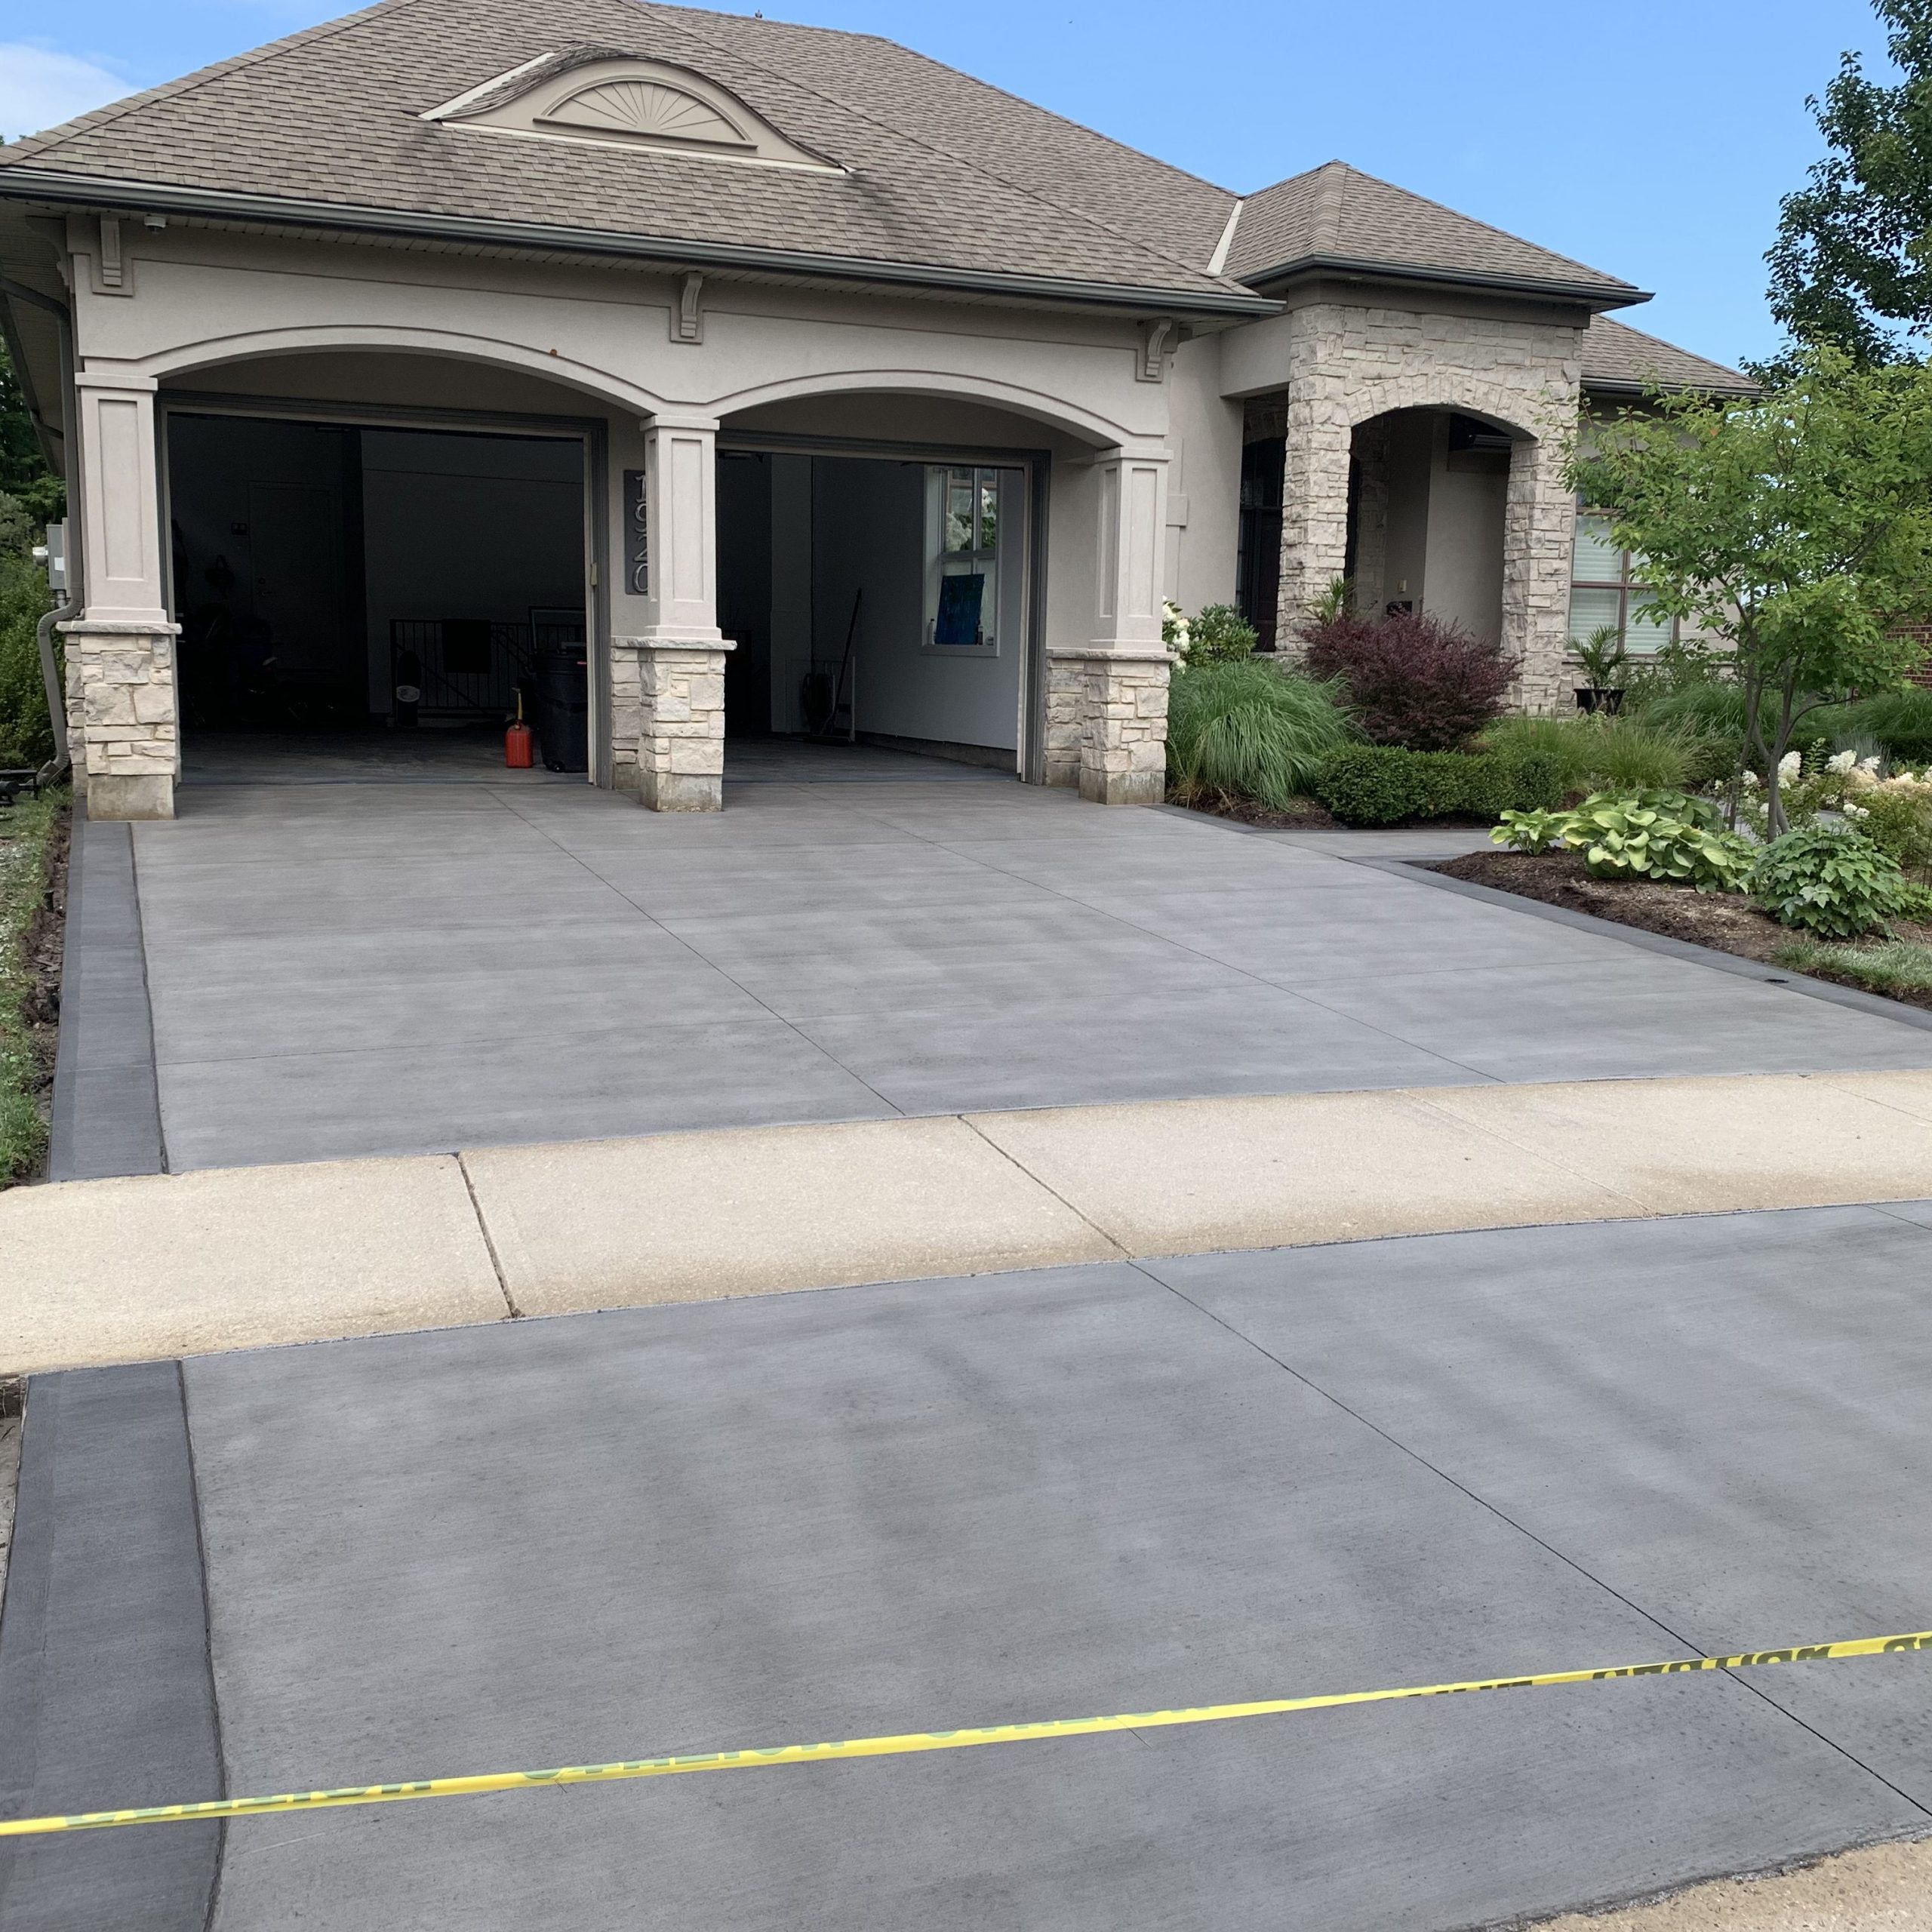 Brushed Concrete Driveway with Separate Border in London Ontario